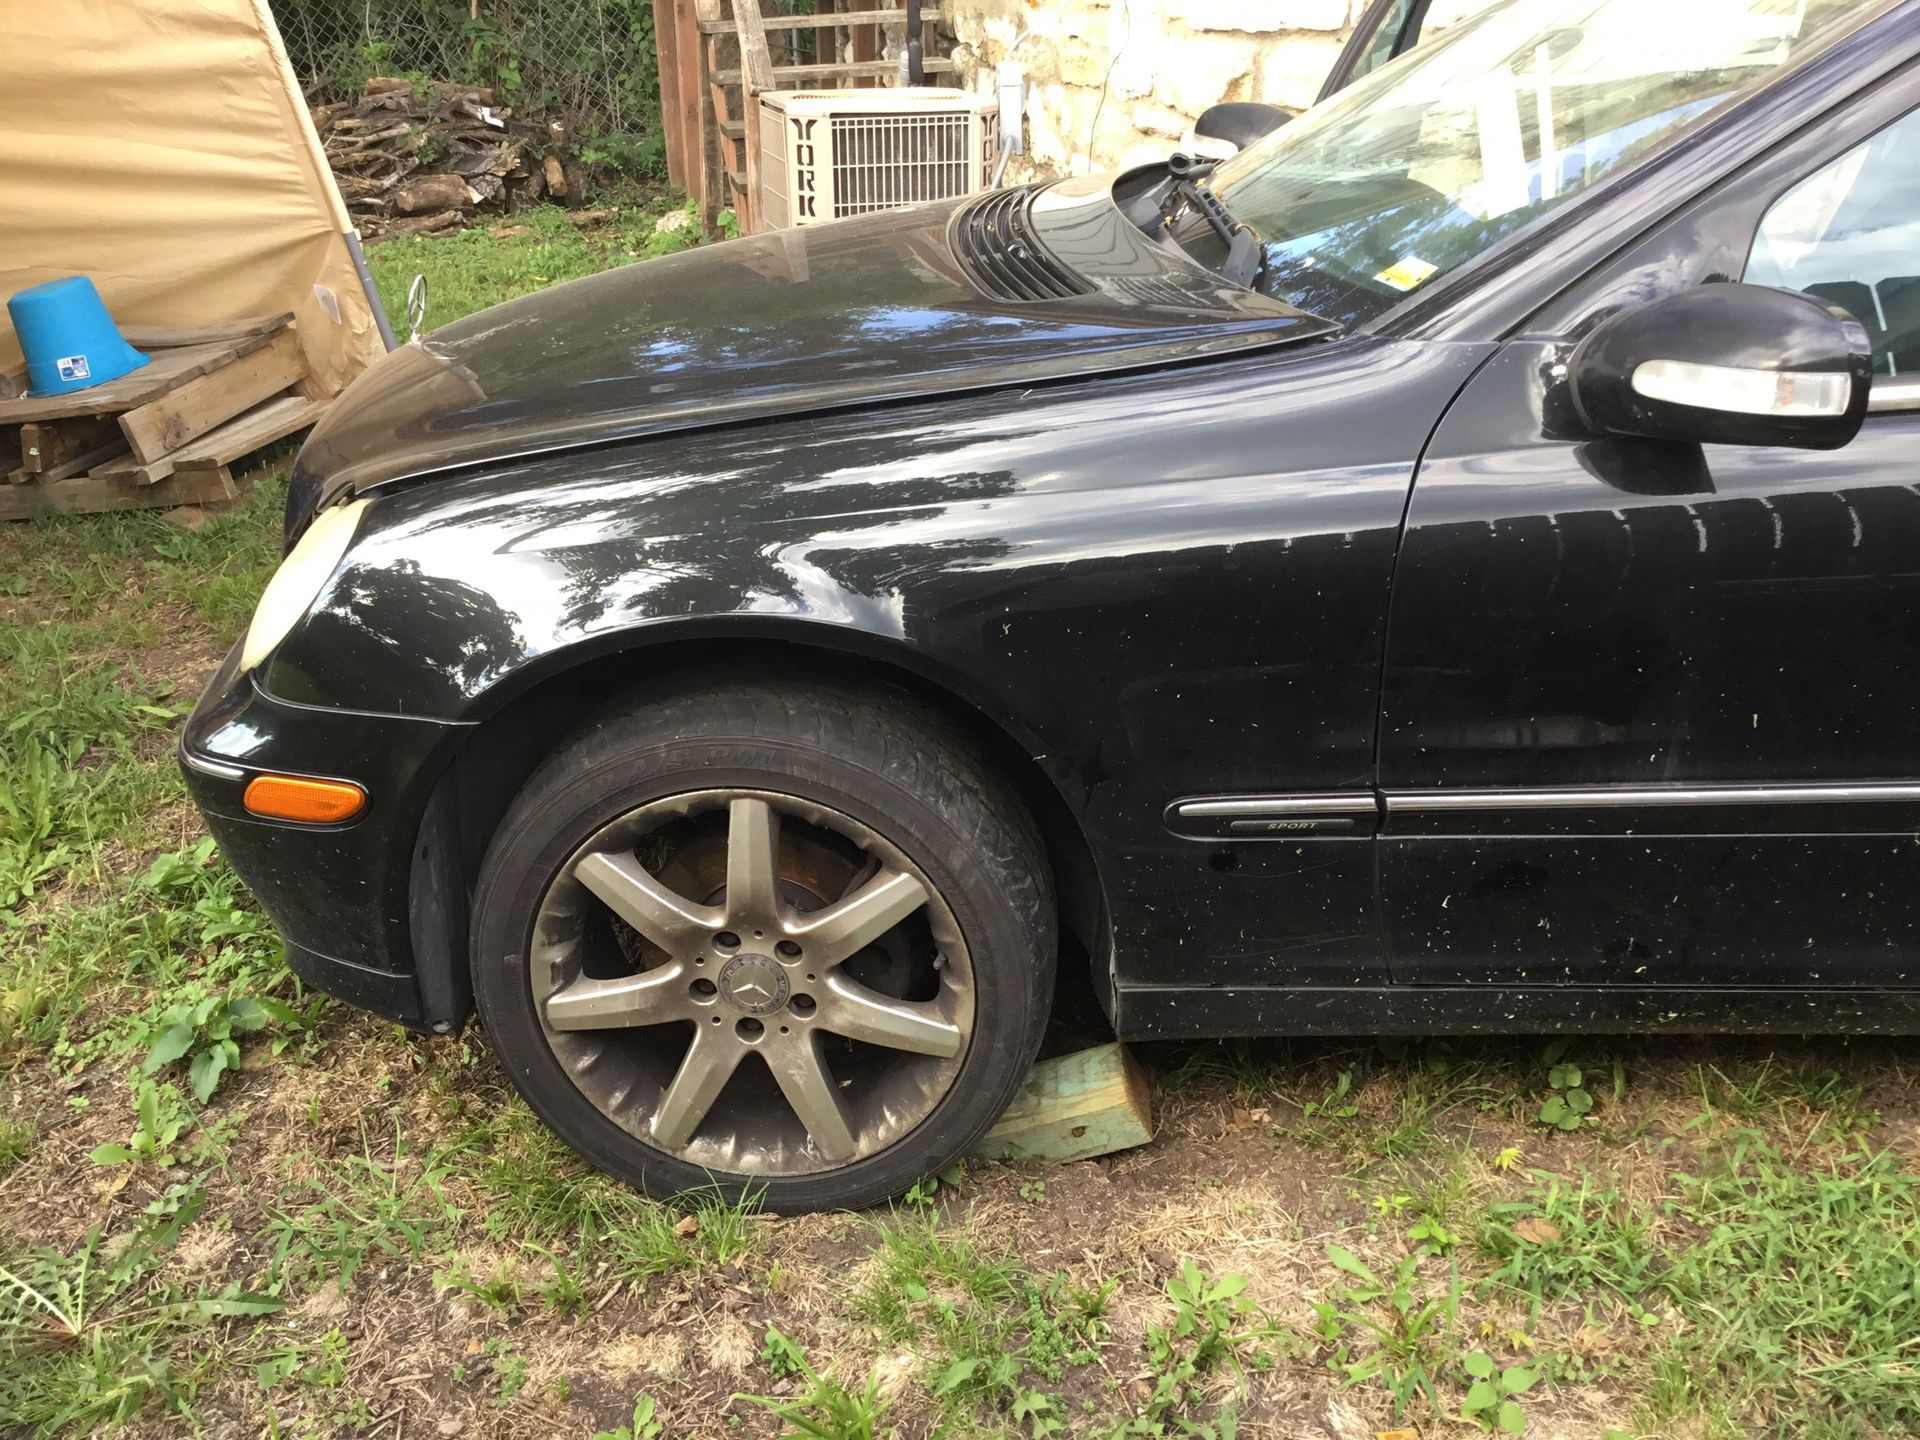 2004 C230 Mercedes parting out make reasonable offer